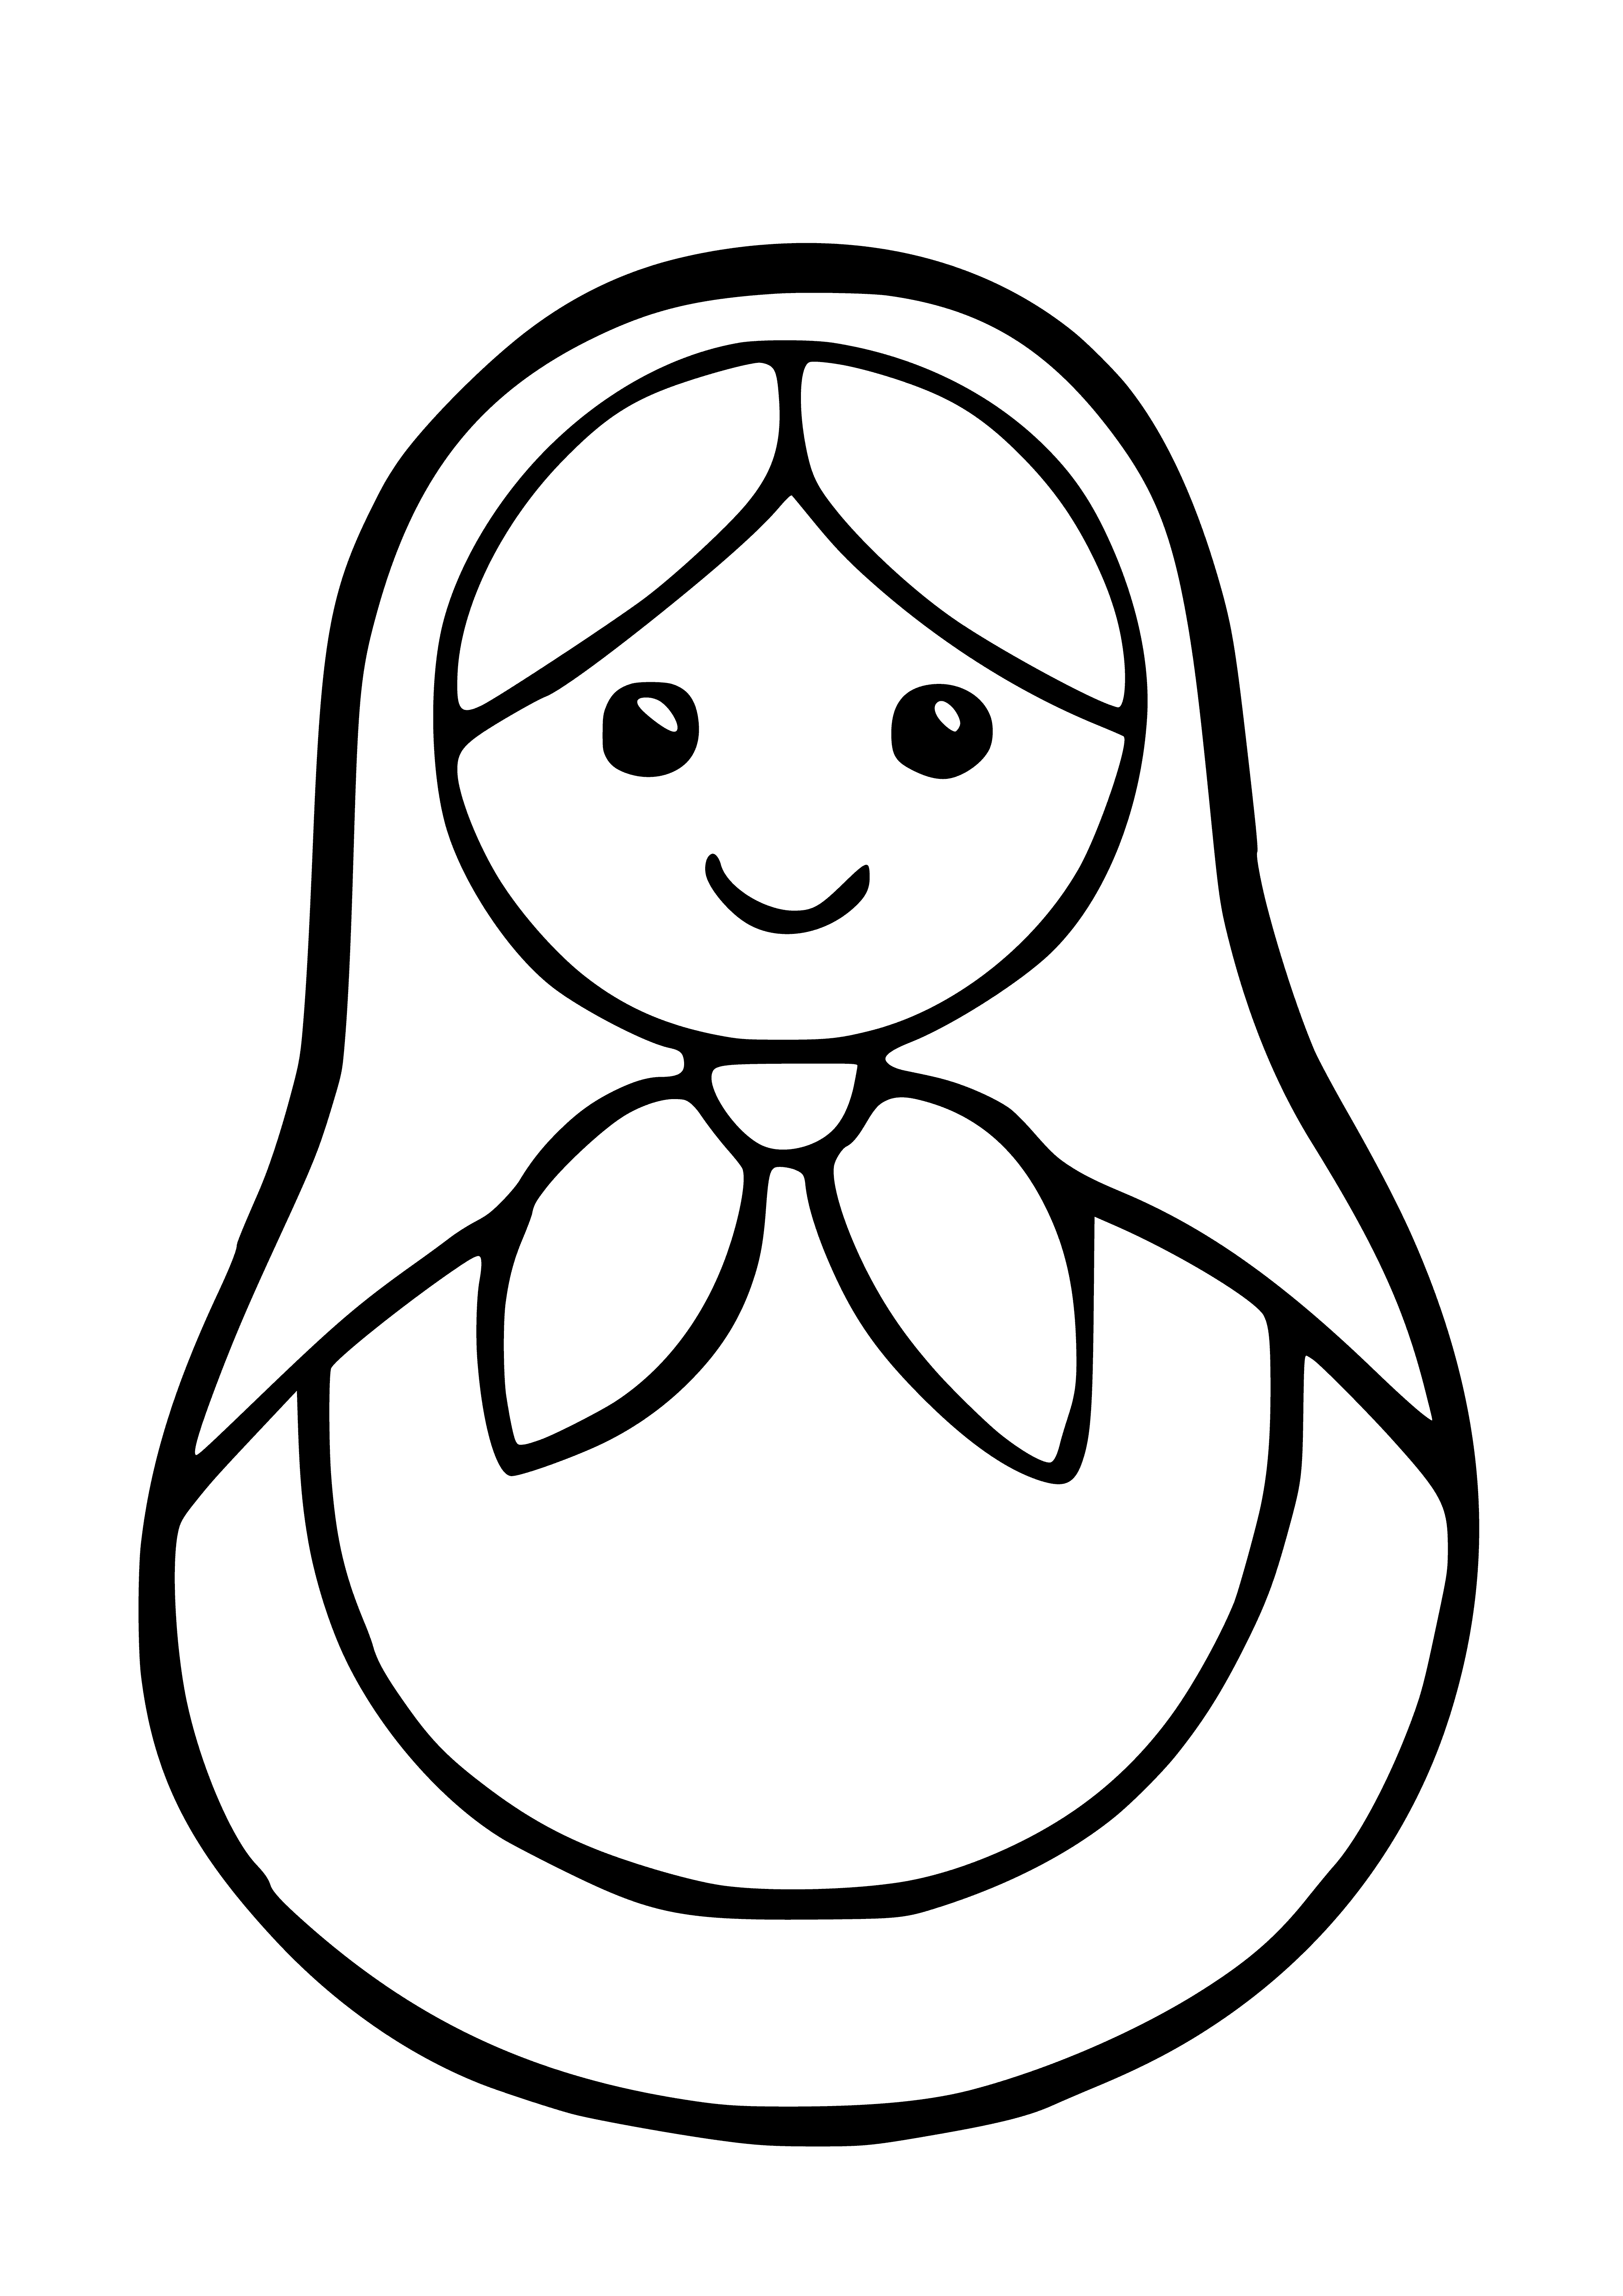 coloring page: Six dolls in a row, decr. size; largest is red, green & wht, smallest red, wht & grn.